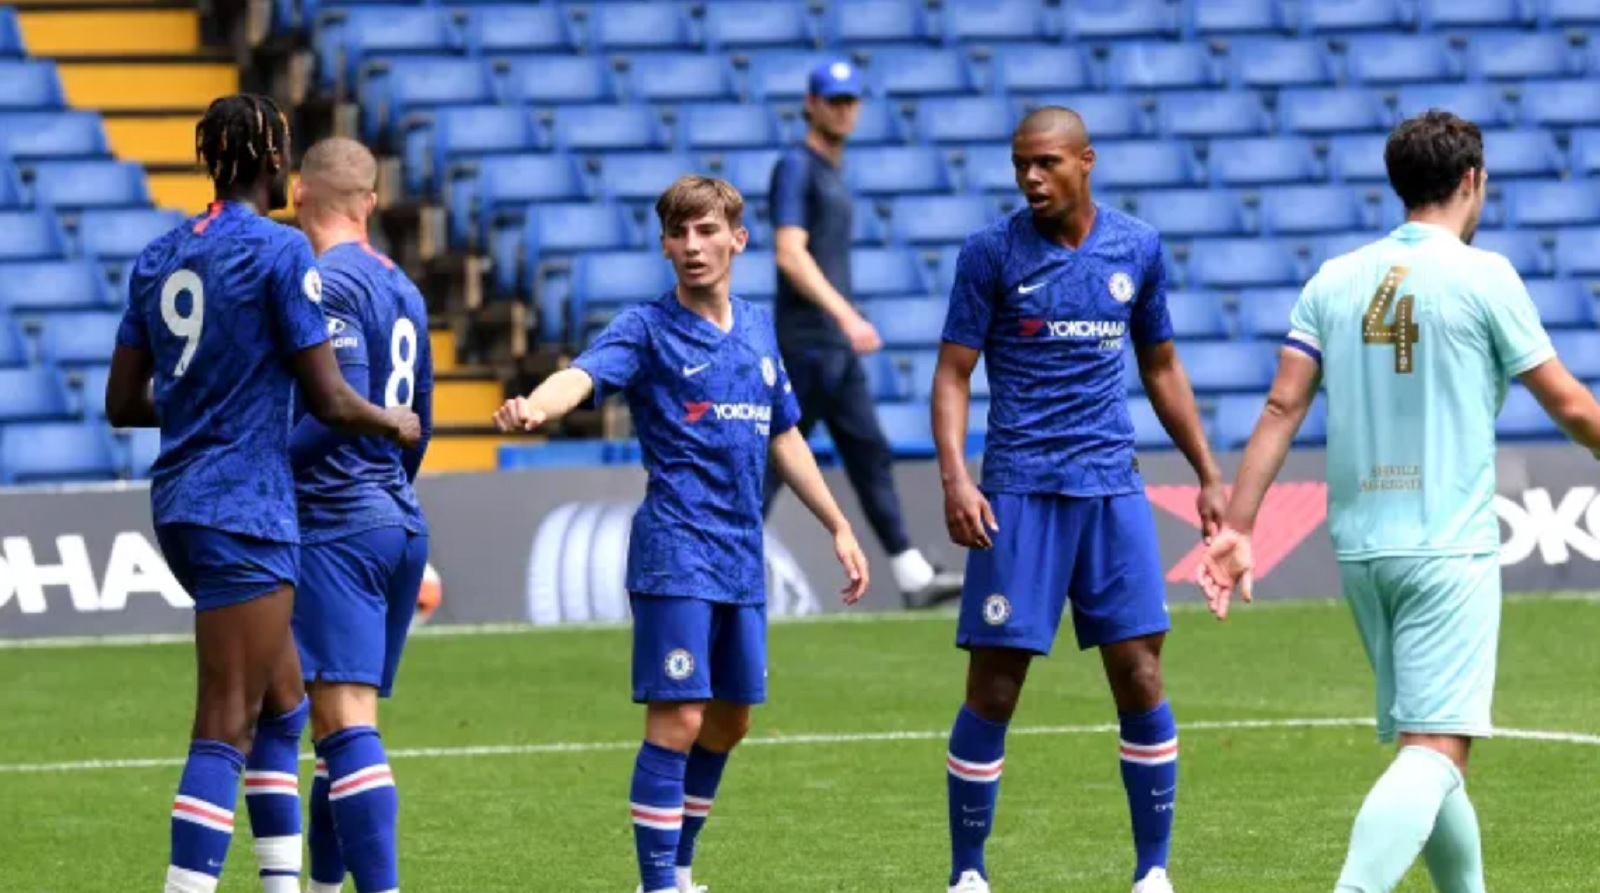 Chelsea Slay QPR with Seven Goals to Their One in a Friendly Bout